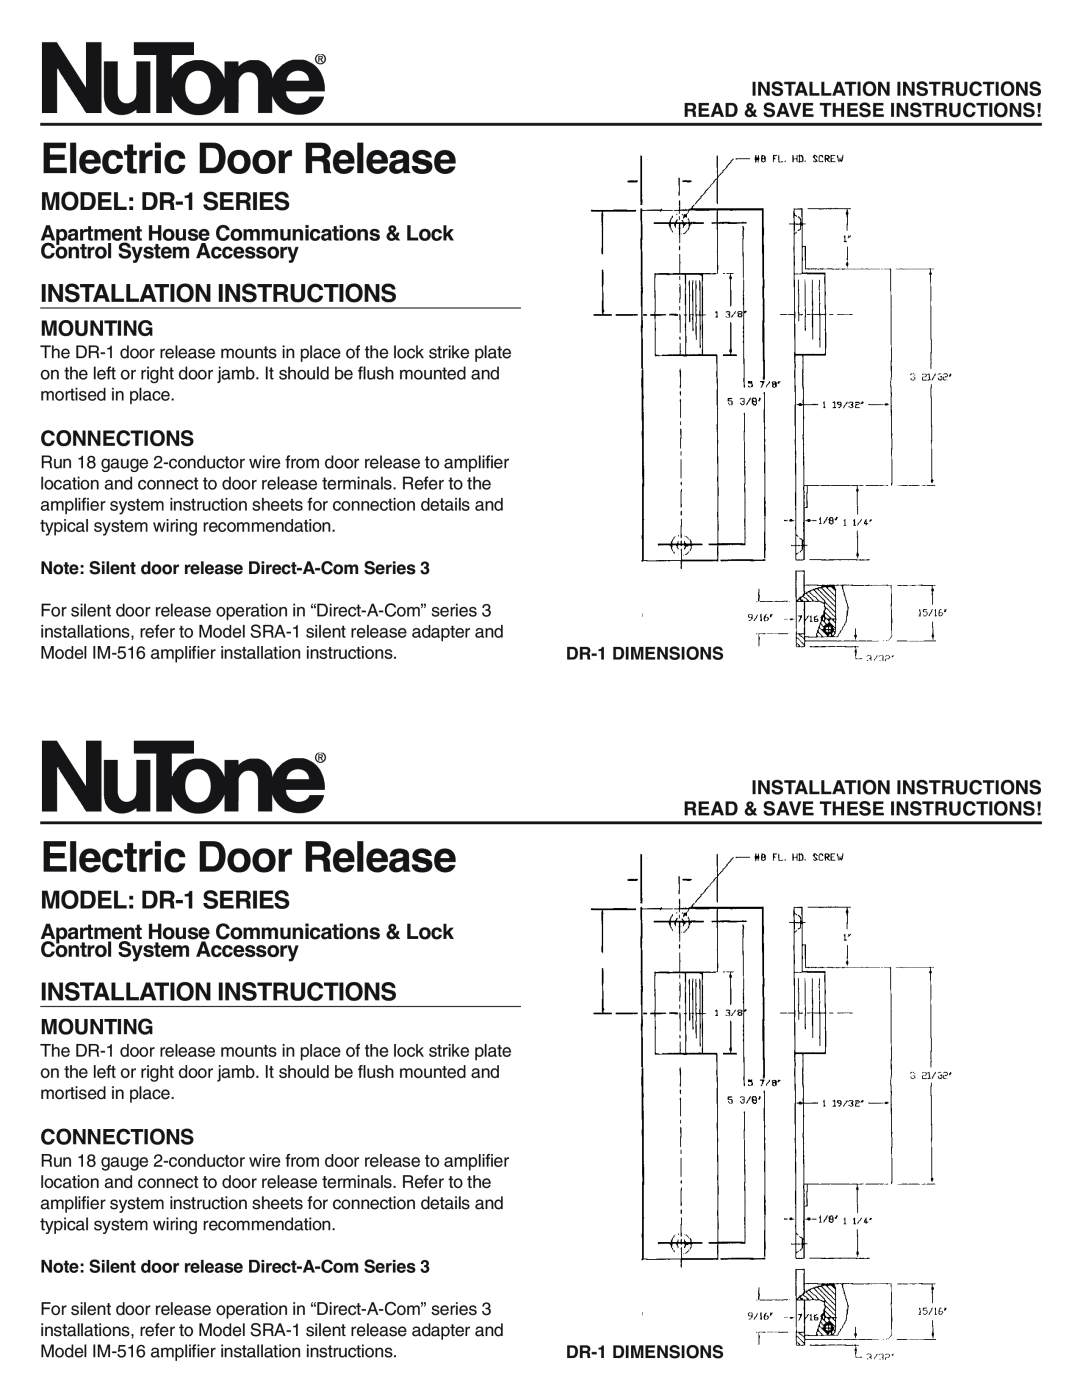 NuTone installation instructions Electric Door Release, MODEL DR-1SERIES, Installation Instructions, Mounting 